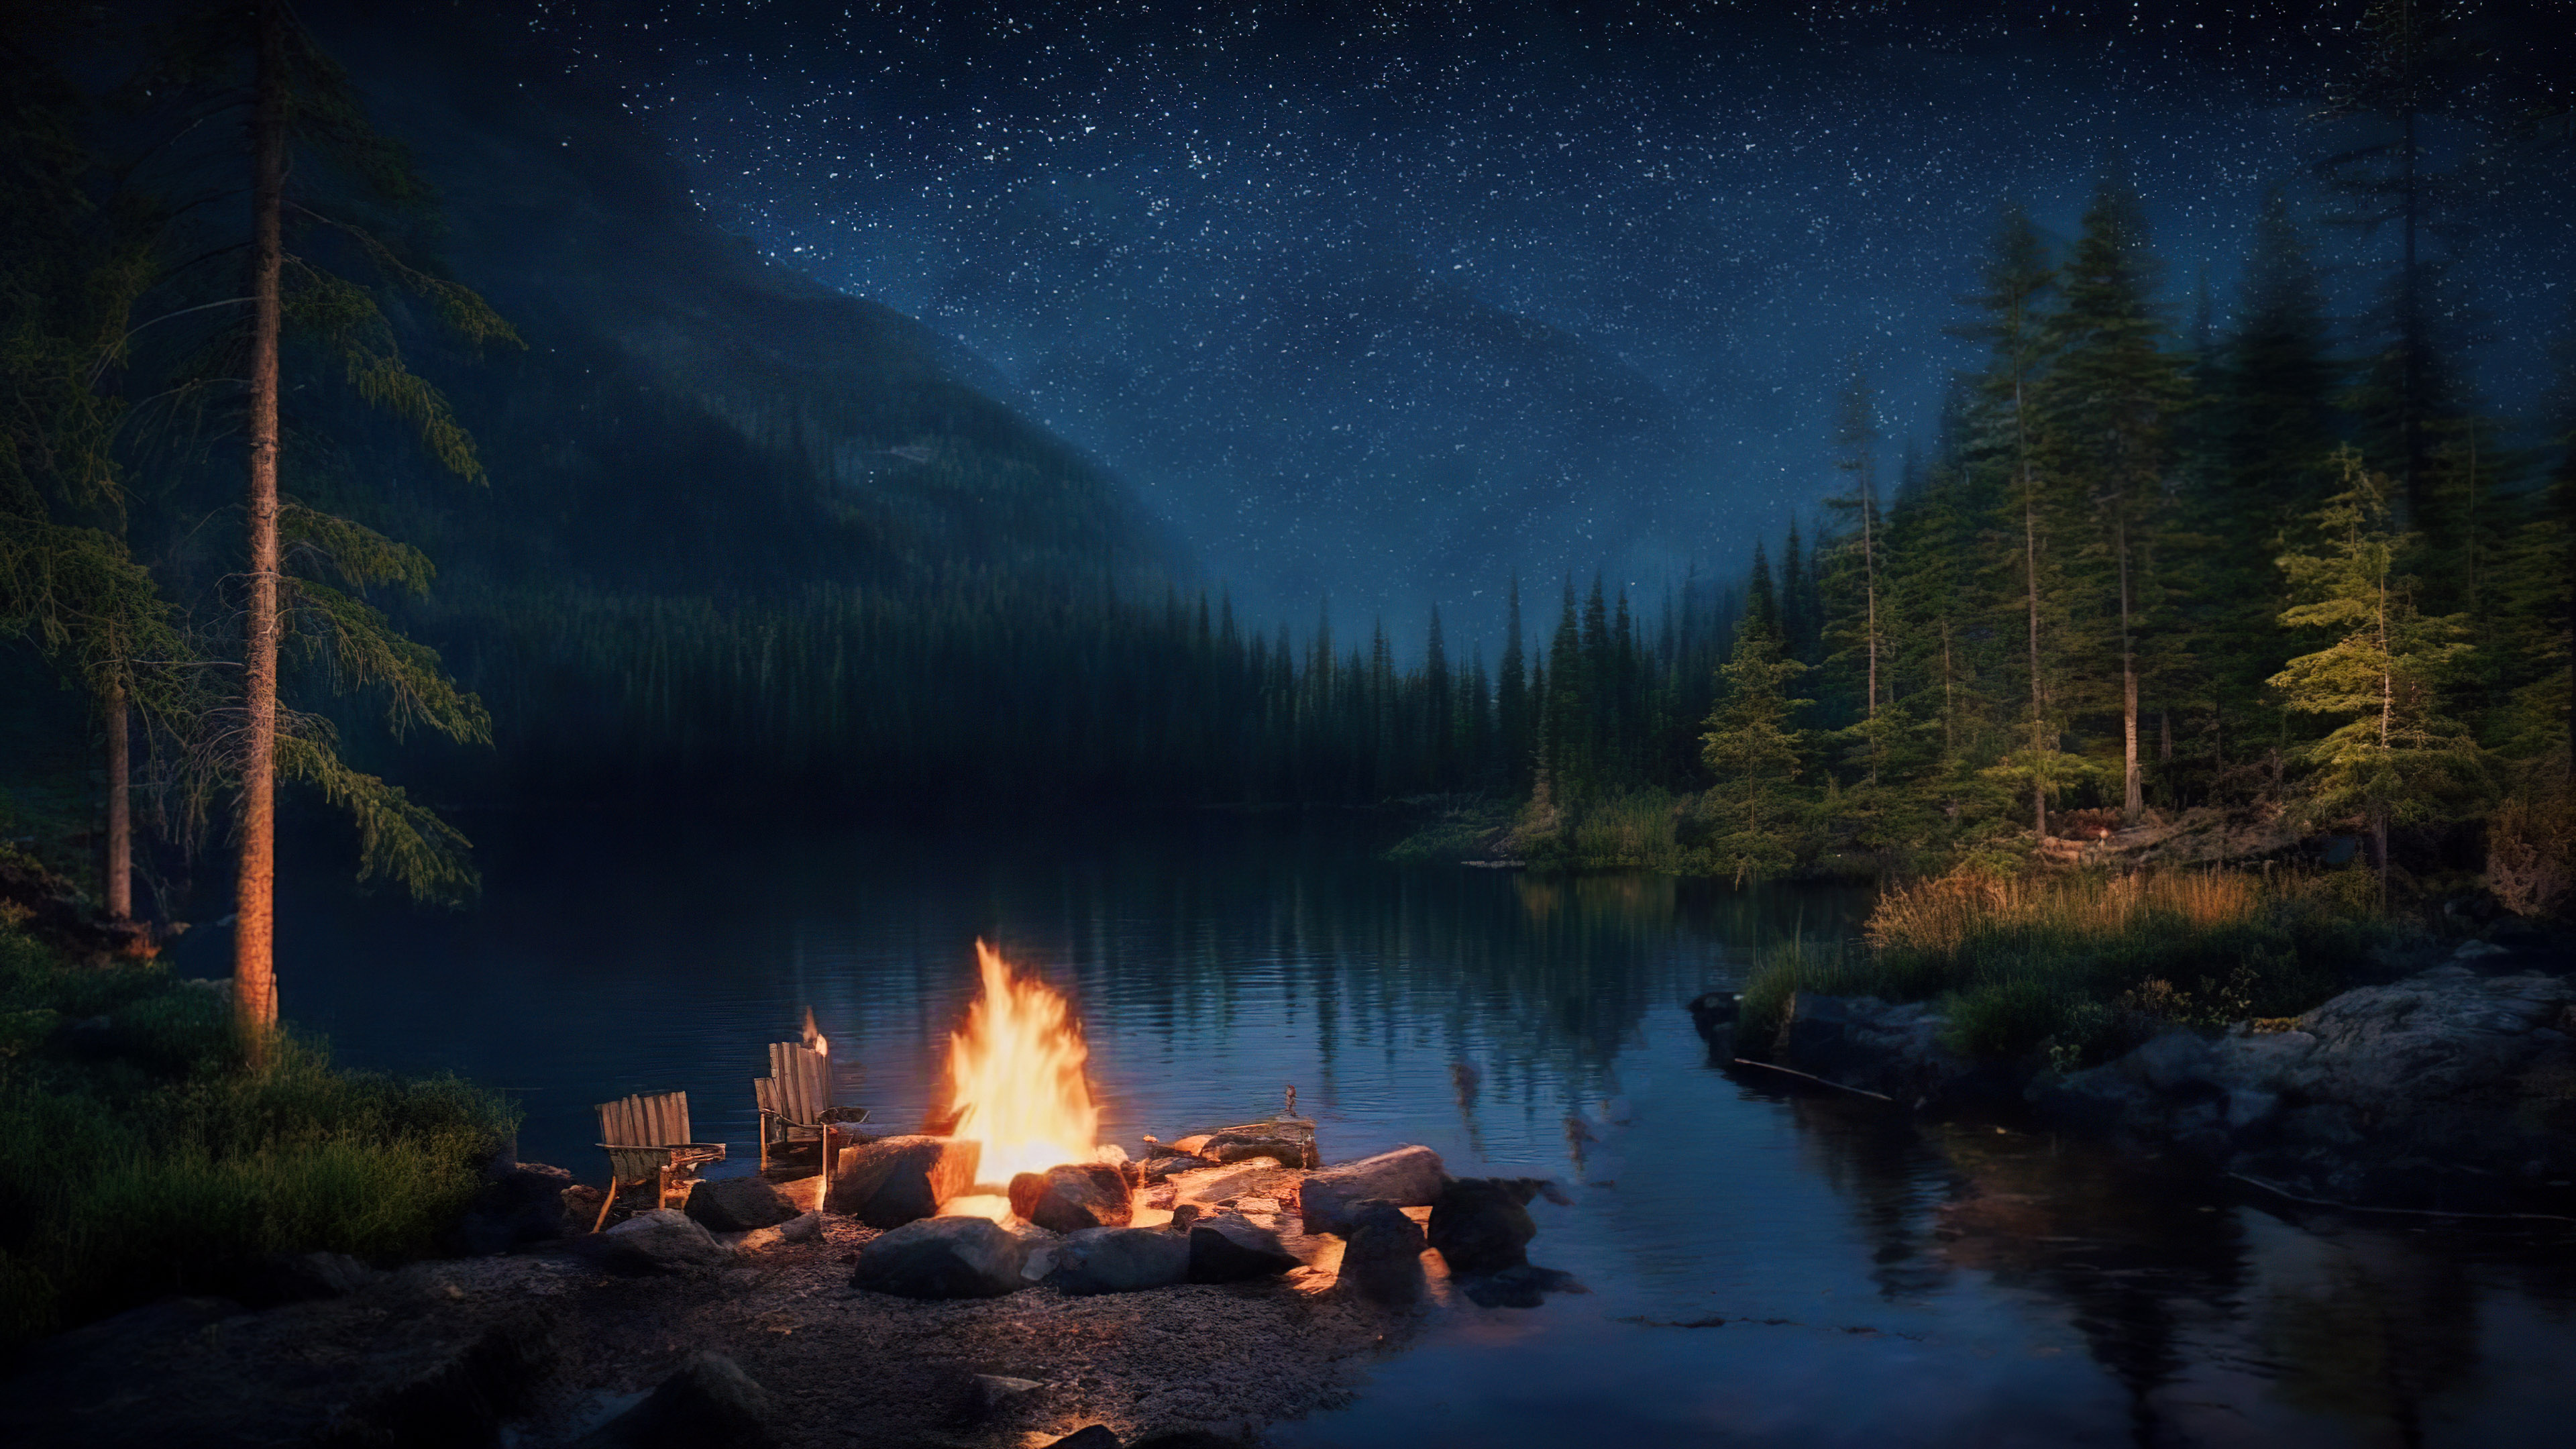 Experience the serenity of our aesthetic night background, featuring a serene lakeside campsite with a flickering campfire, surrounded by a dark, wooded wilderness.